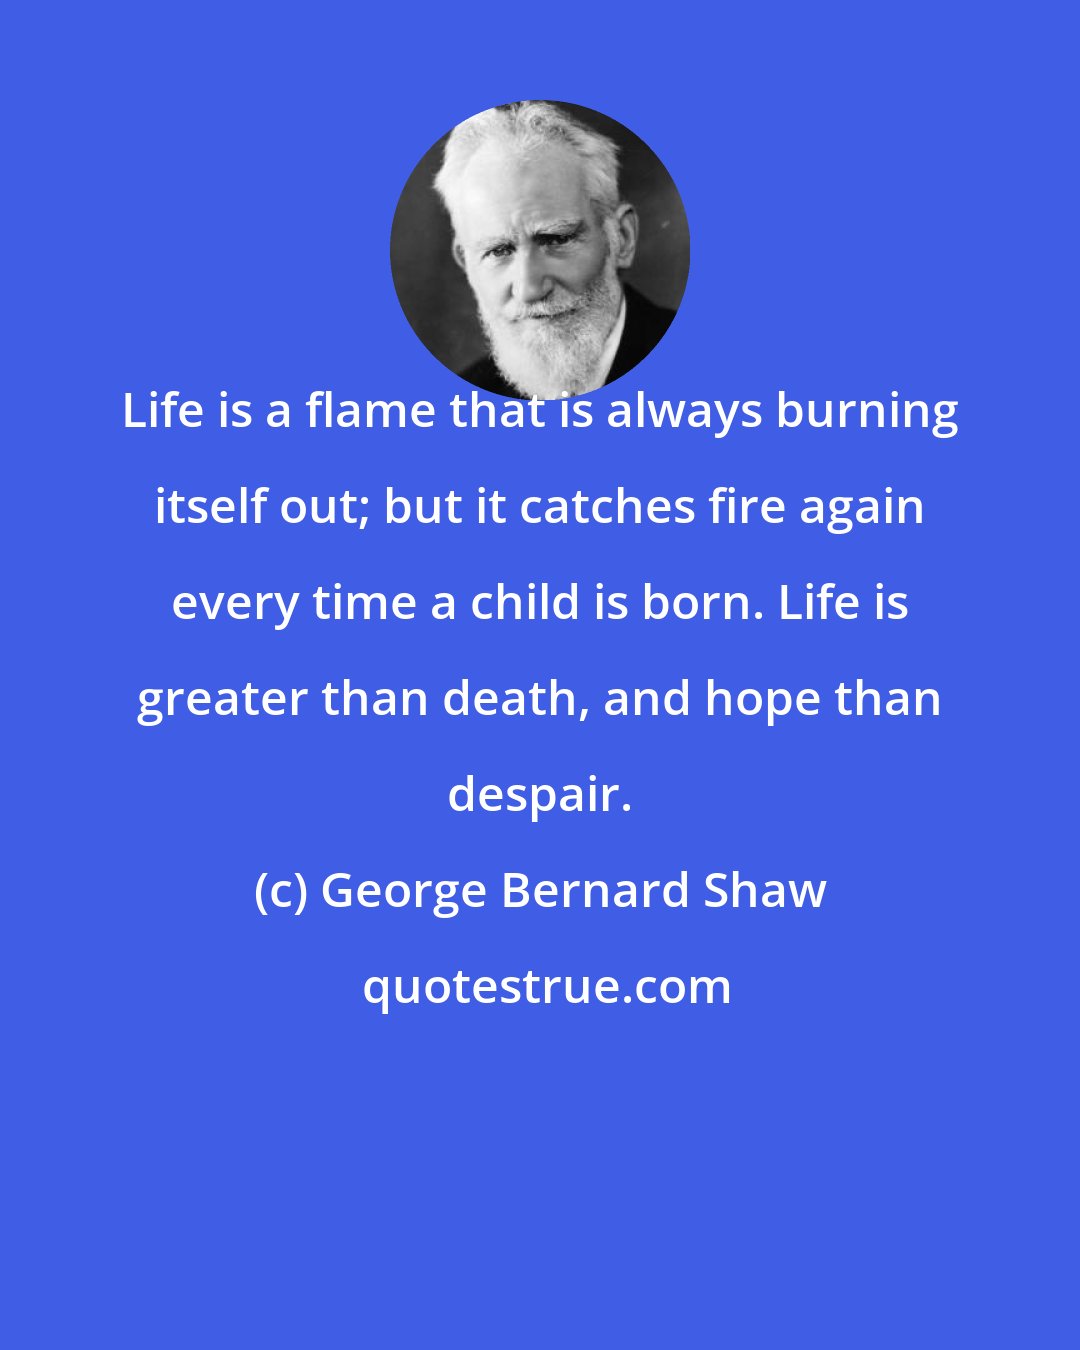 George Bernard Shaw: Life is a flame that is always burning itself out; but it catches fire again every time a child is born. Life is greater than death, and hope than despair.